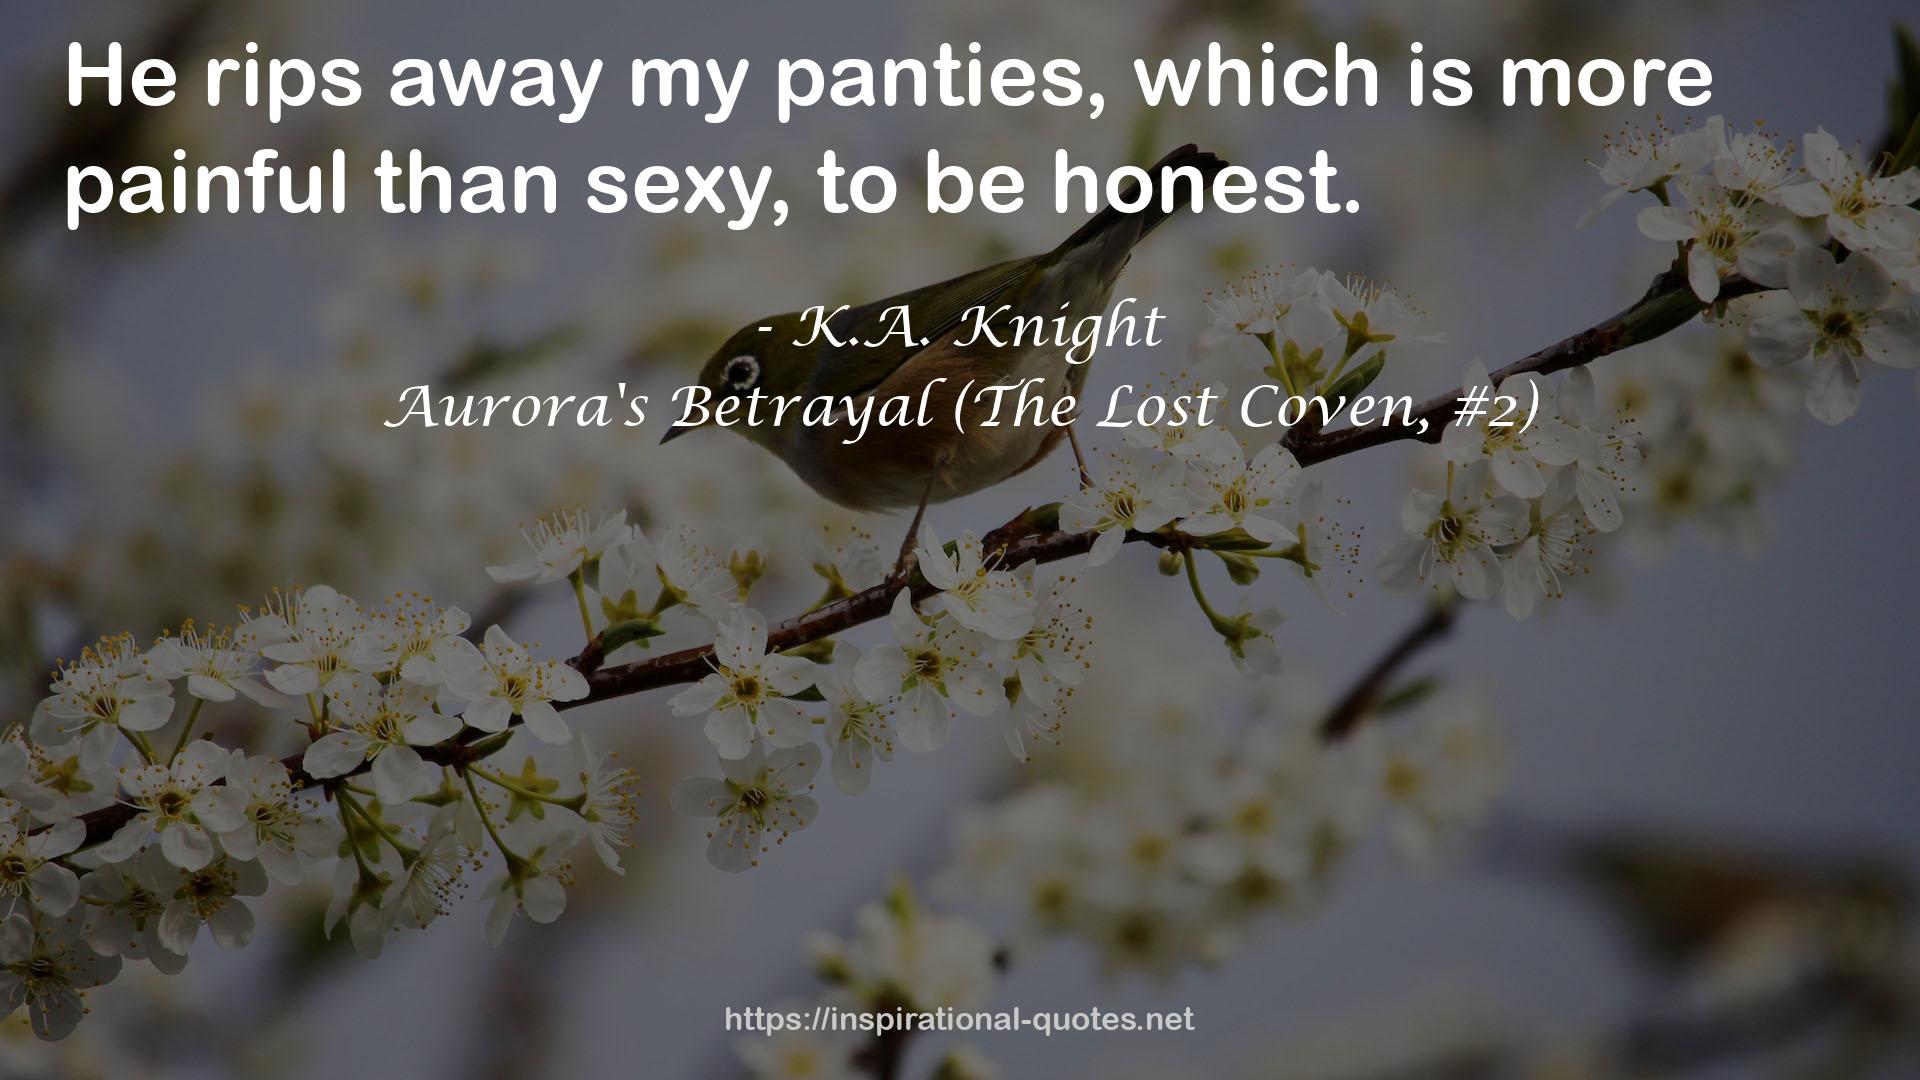 Aurora's Betrayal (The Lost Coven, #2) QUOTES